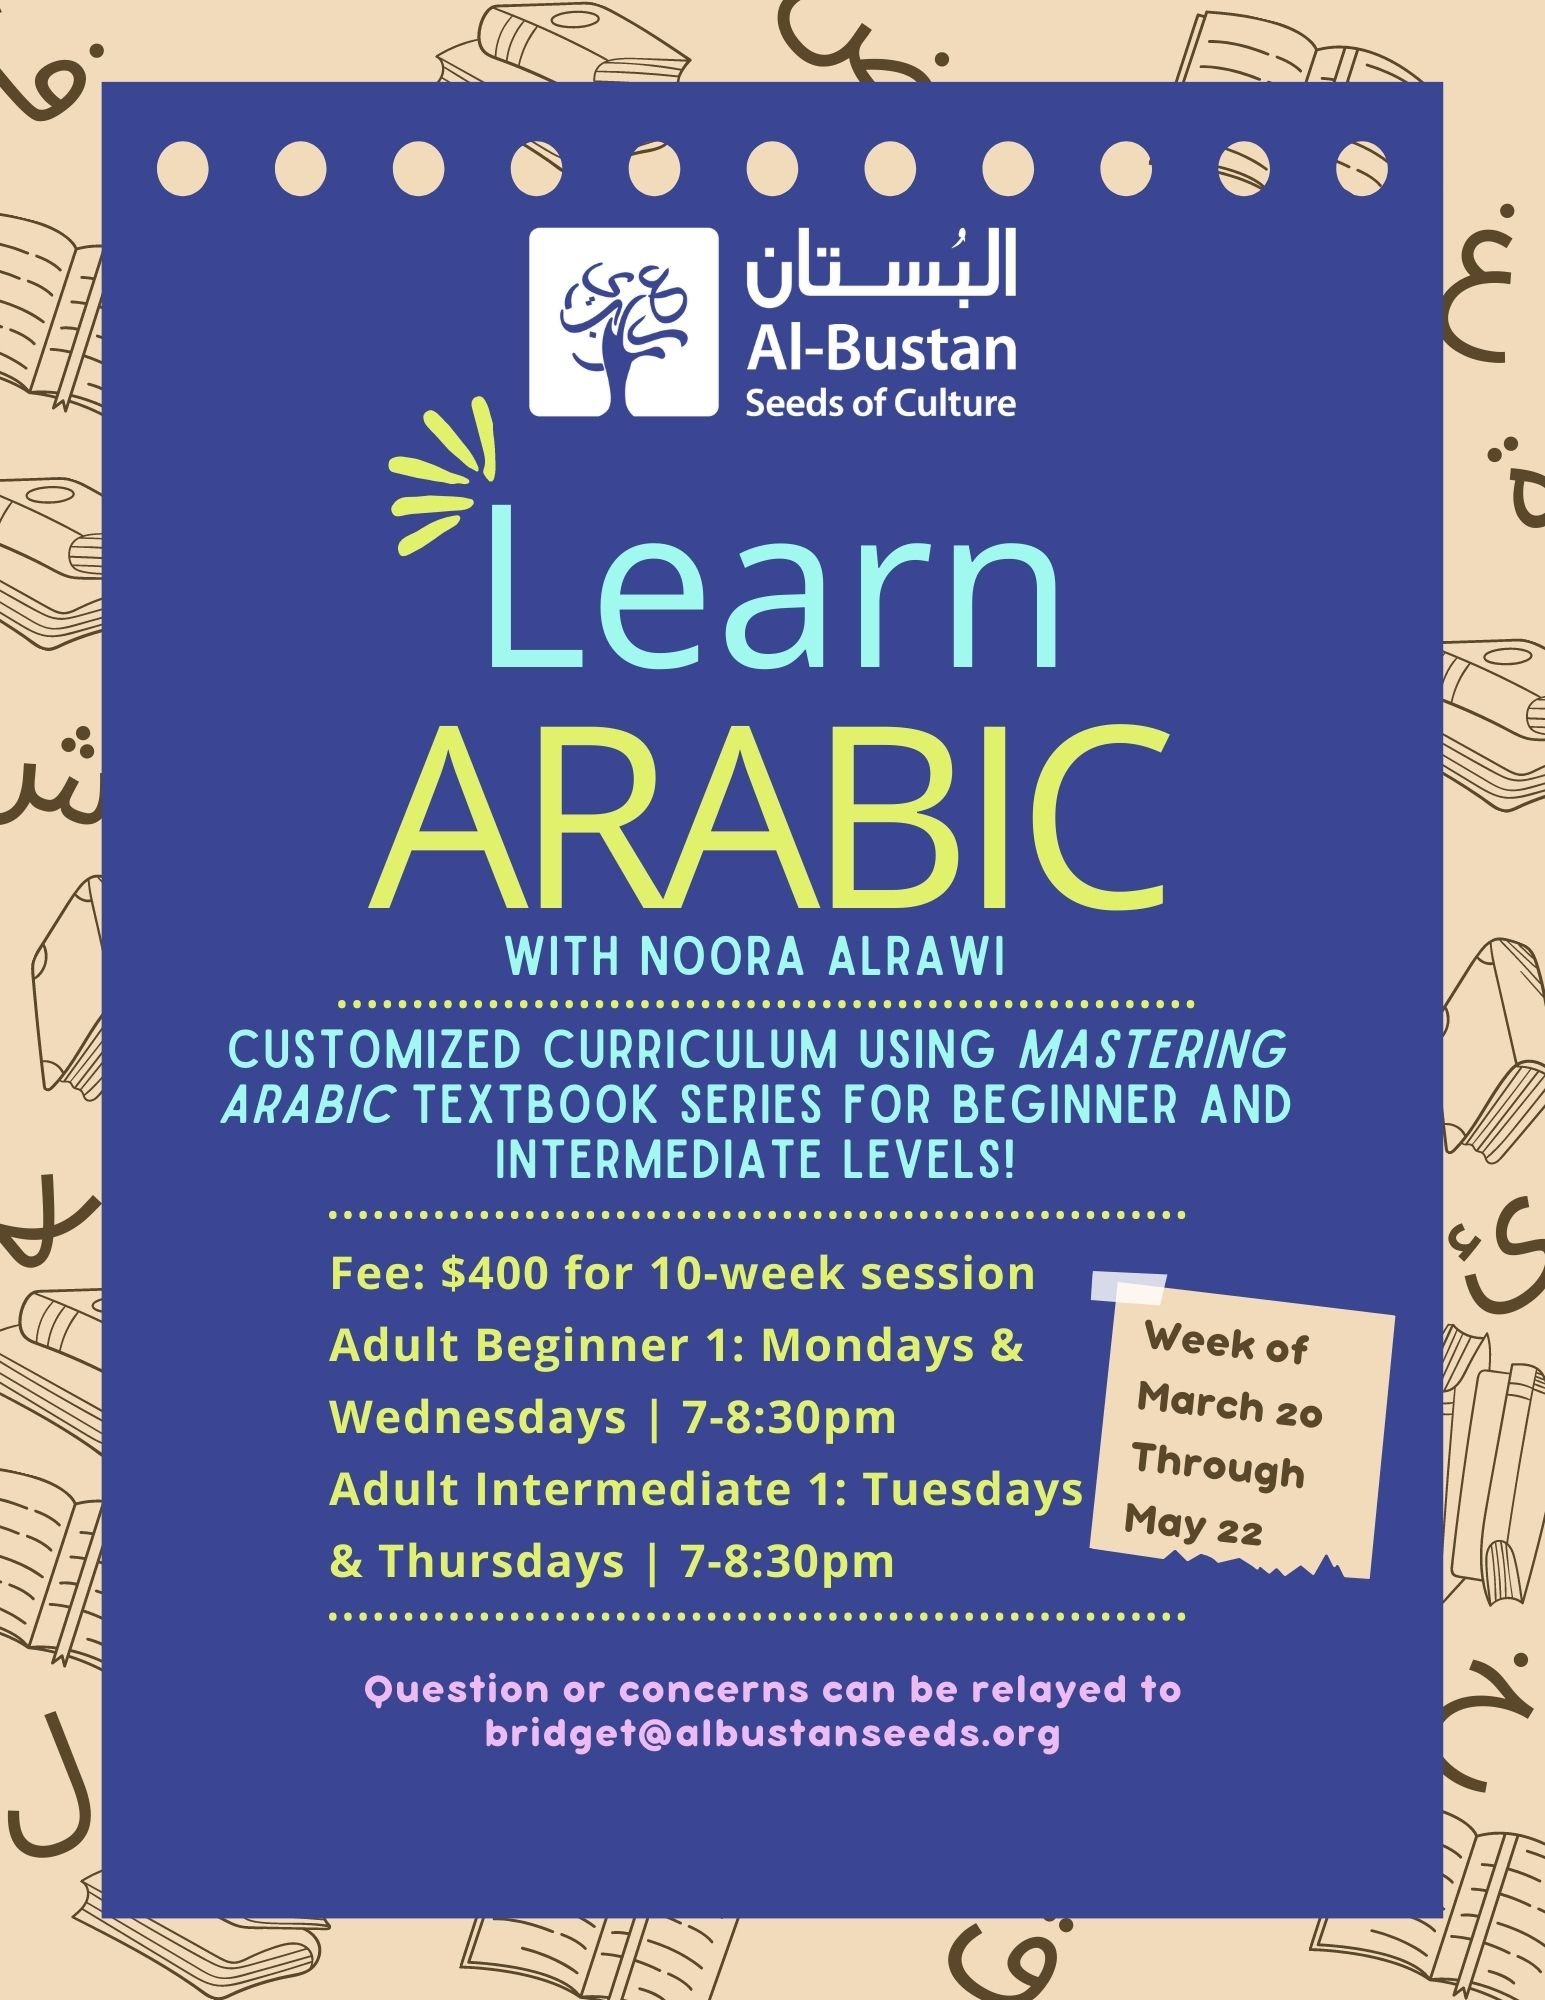 Spring Adult Arabic Courses! — Al-Bustan Seeds of Culture